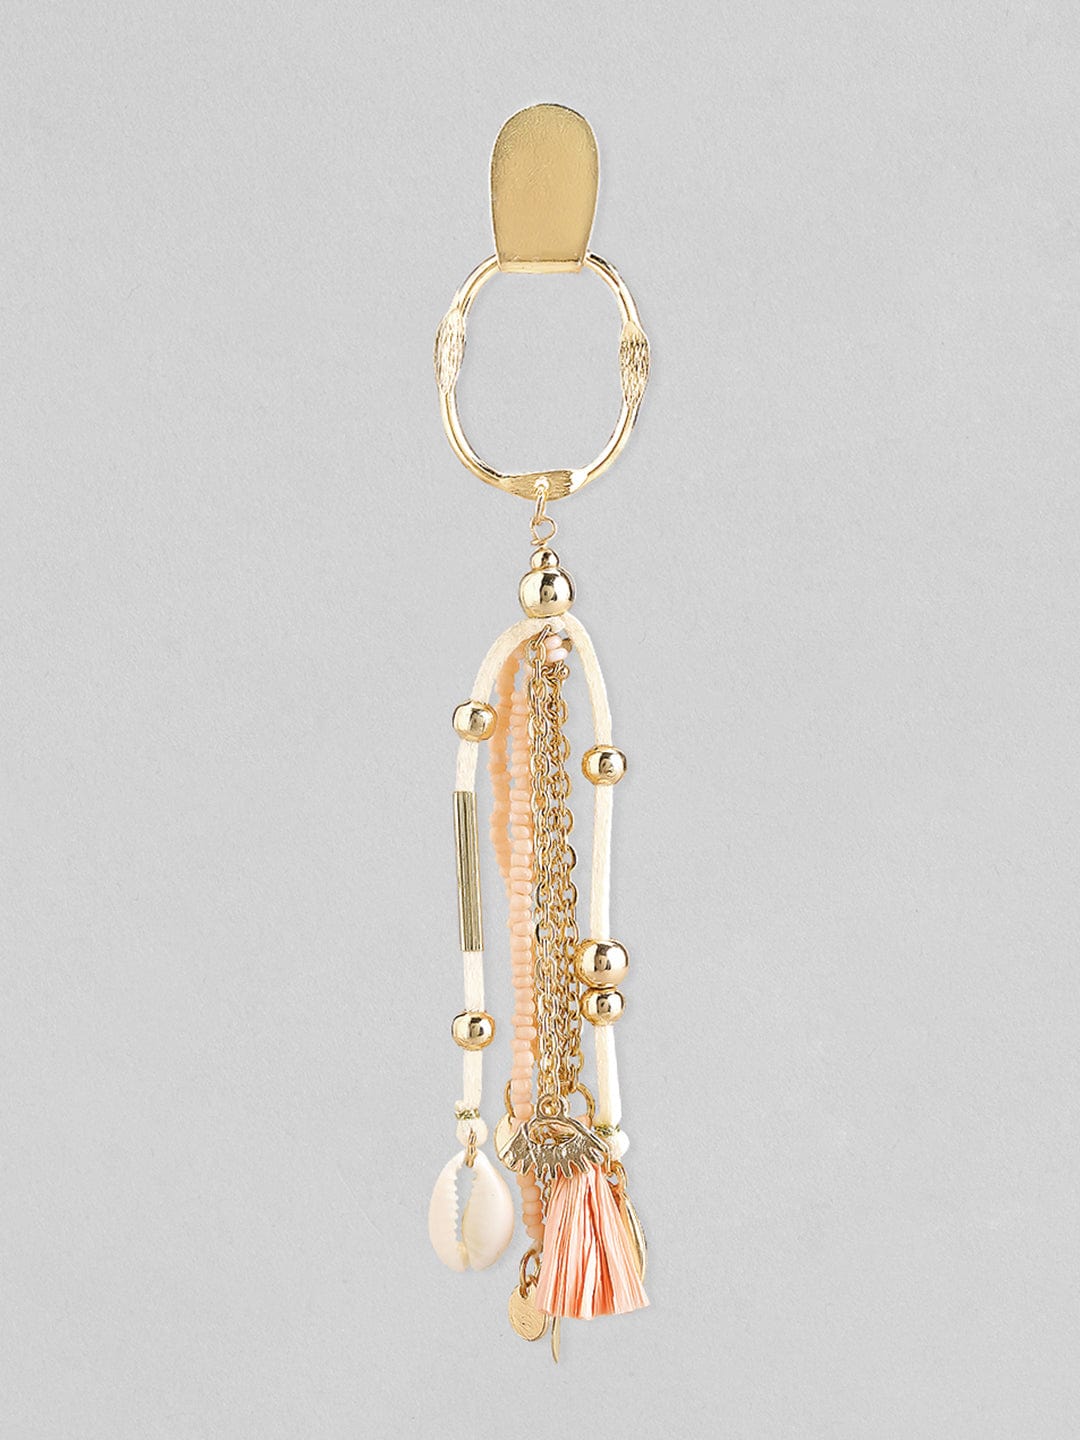 Rubans Voguish Gold Plated Handcrafted Pink Beaded Drop Earrings. Earrings